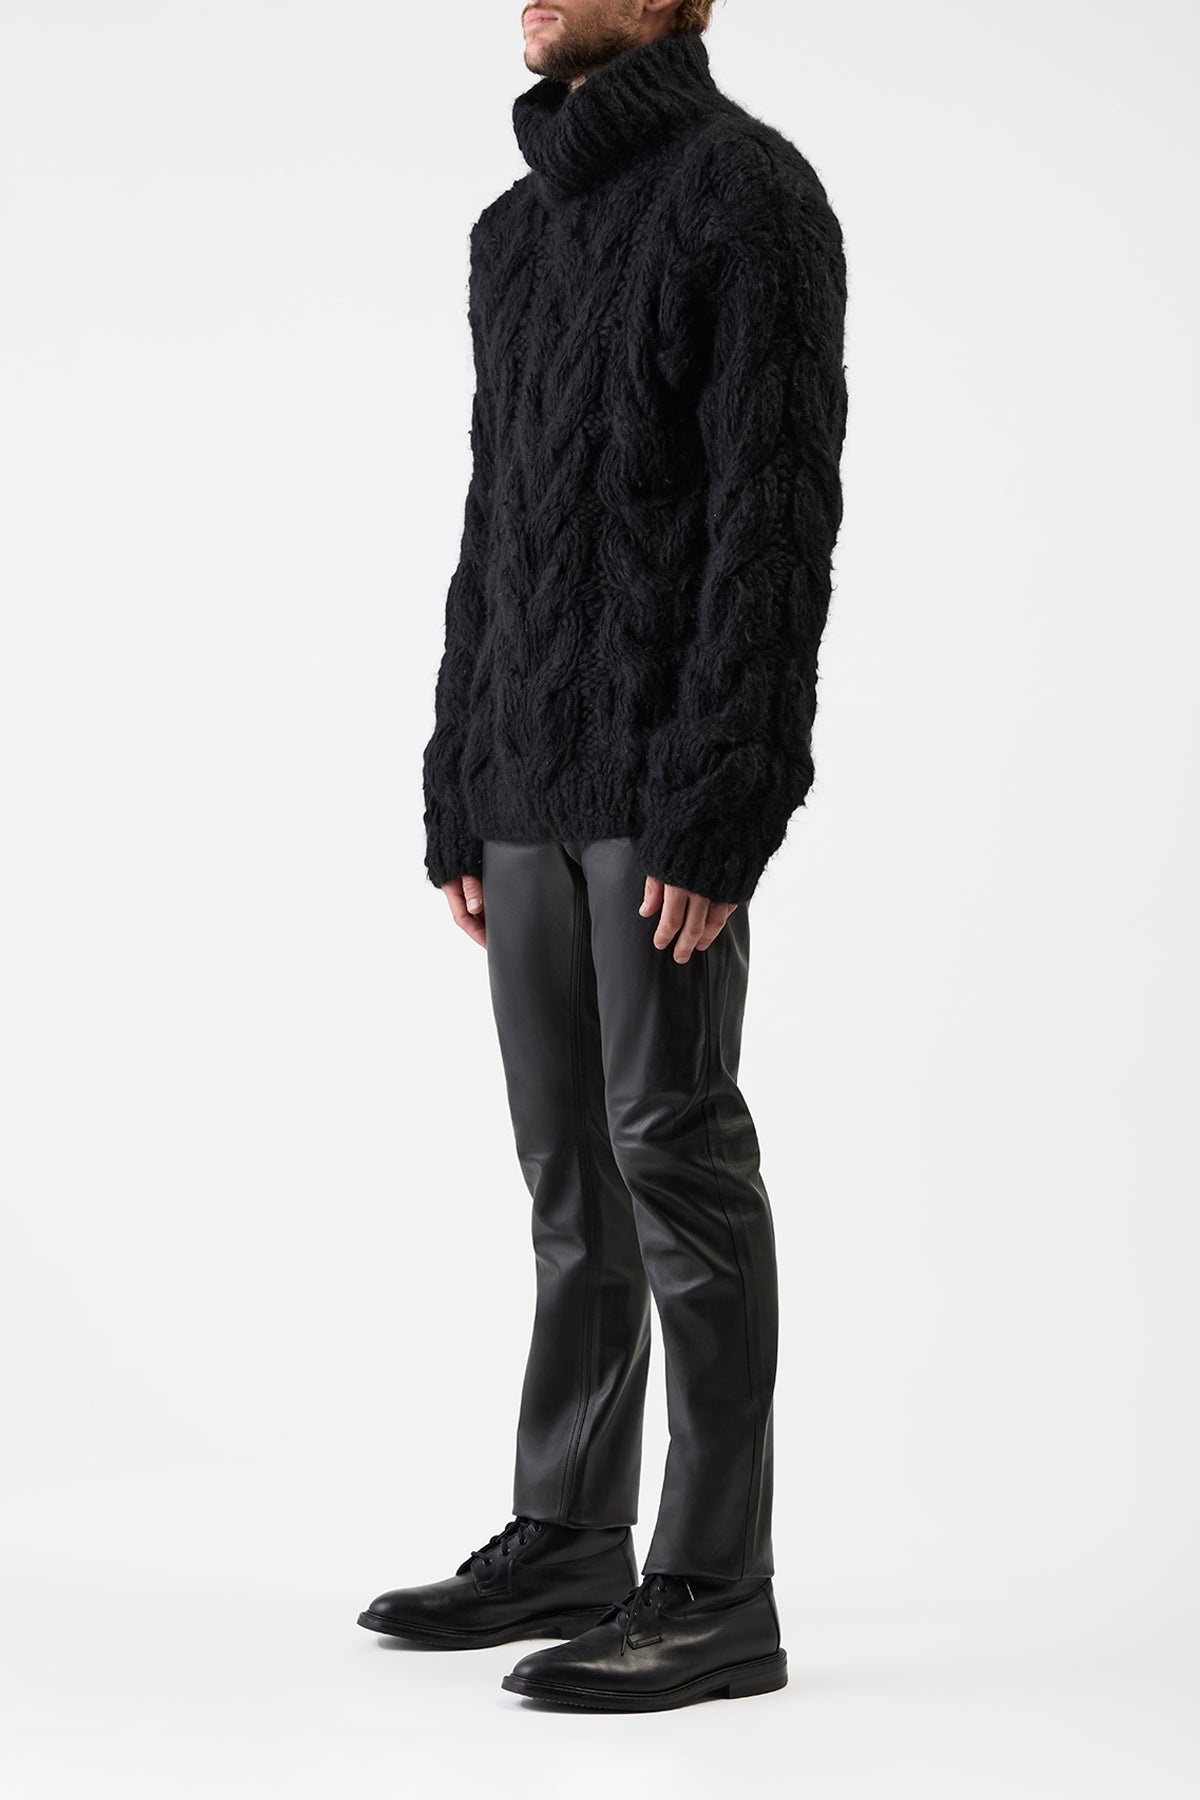 Ray Knit Sweater in Black Welfat Cashmere - 4